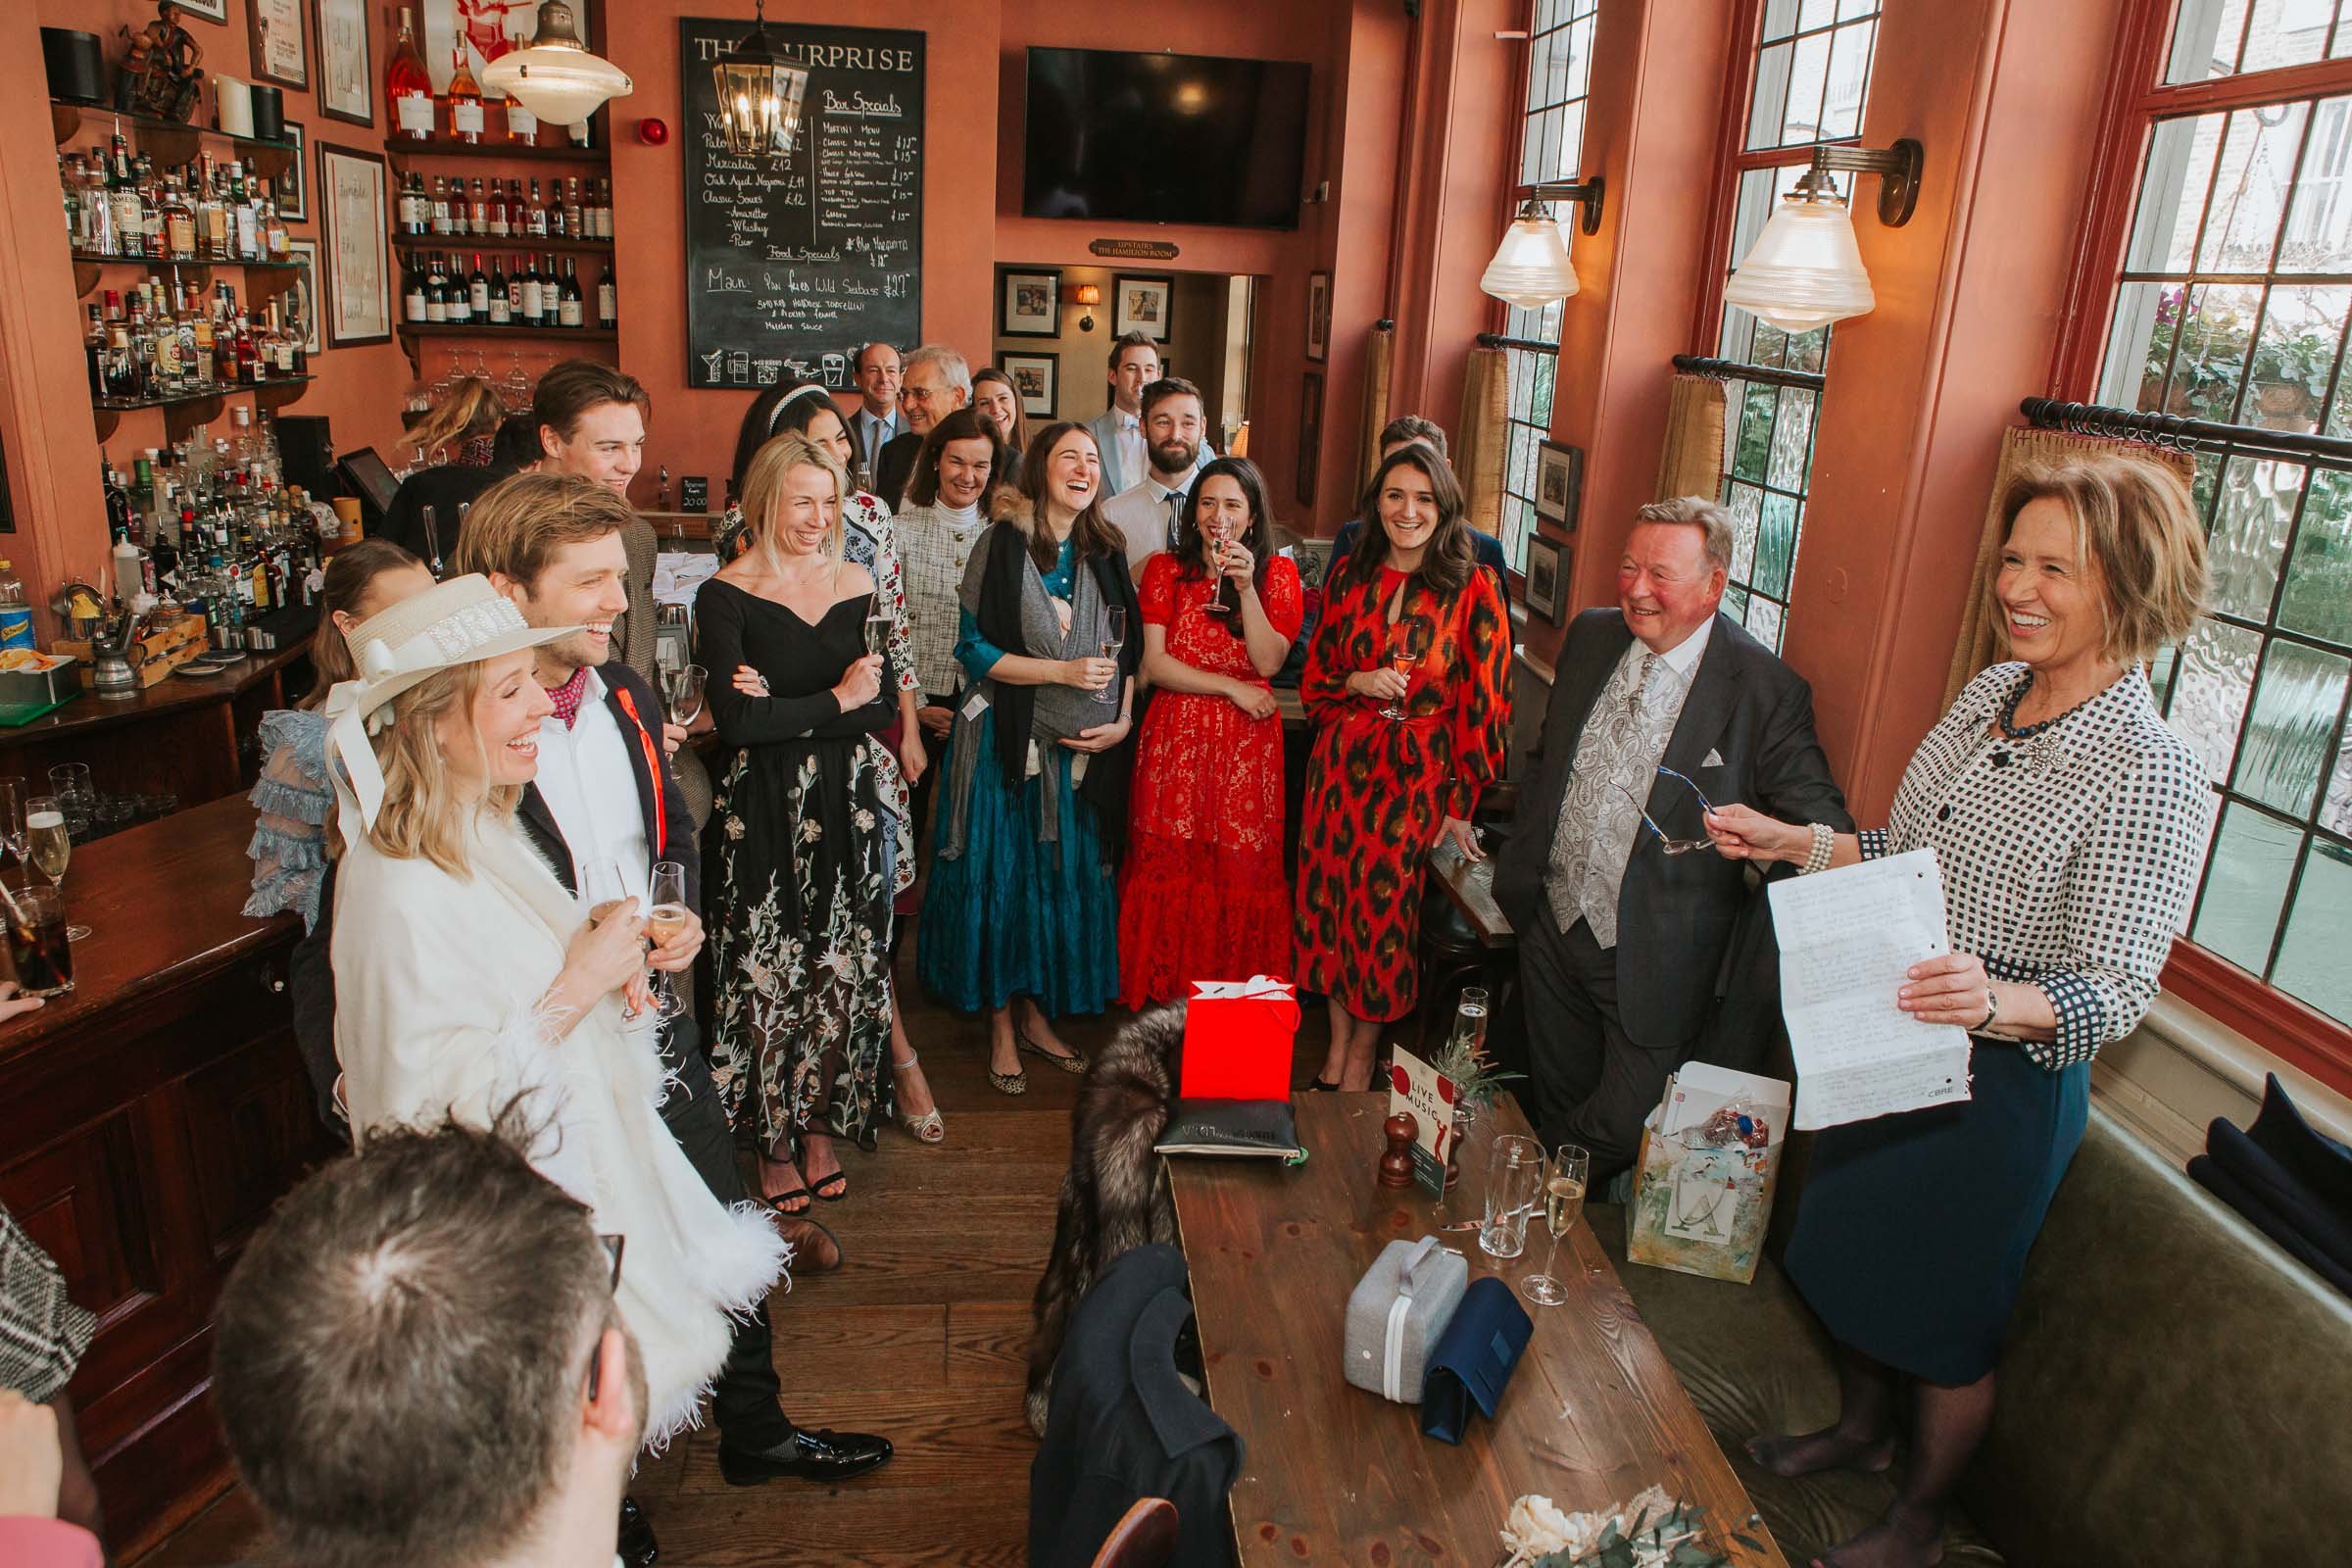  Wedding speeches at the Surprise Pub in Chelsea. 